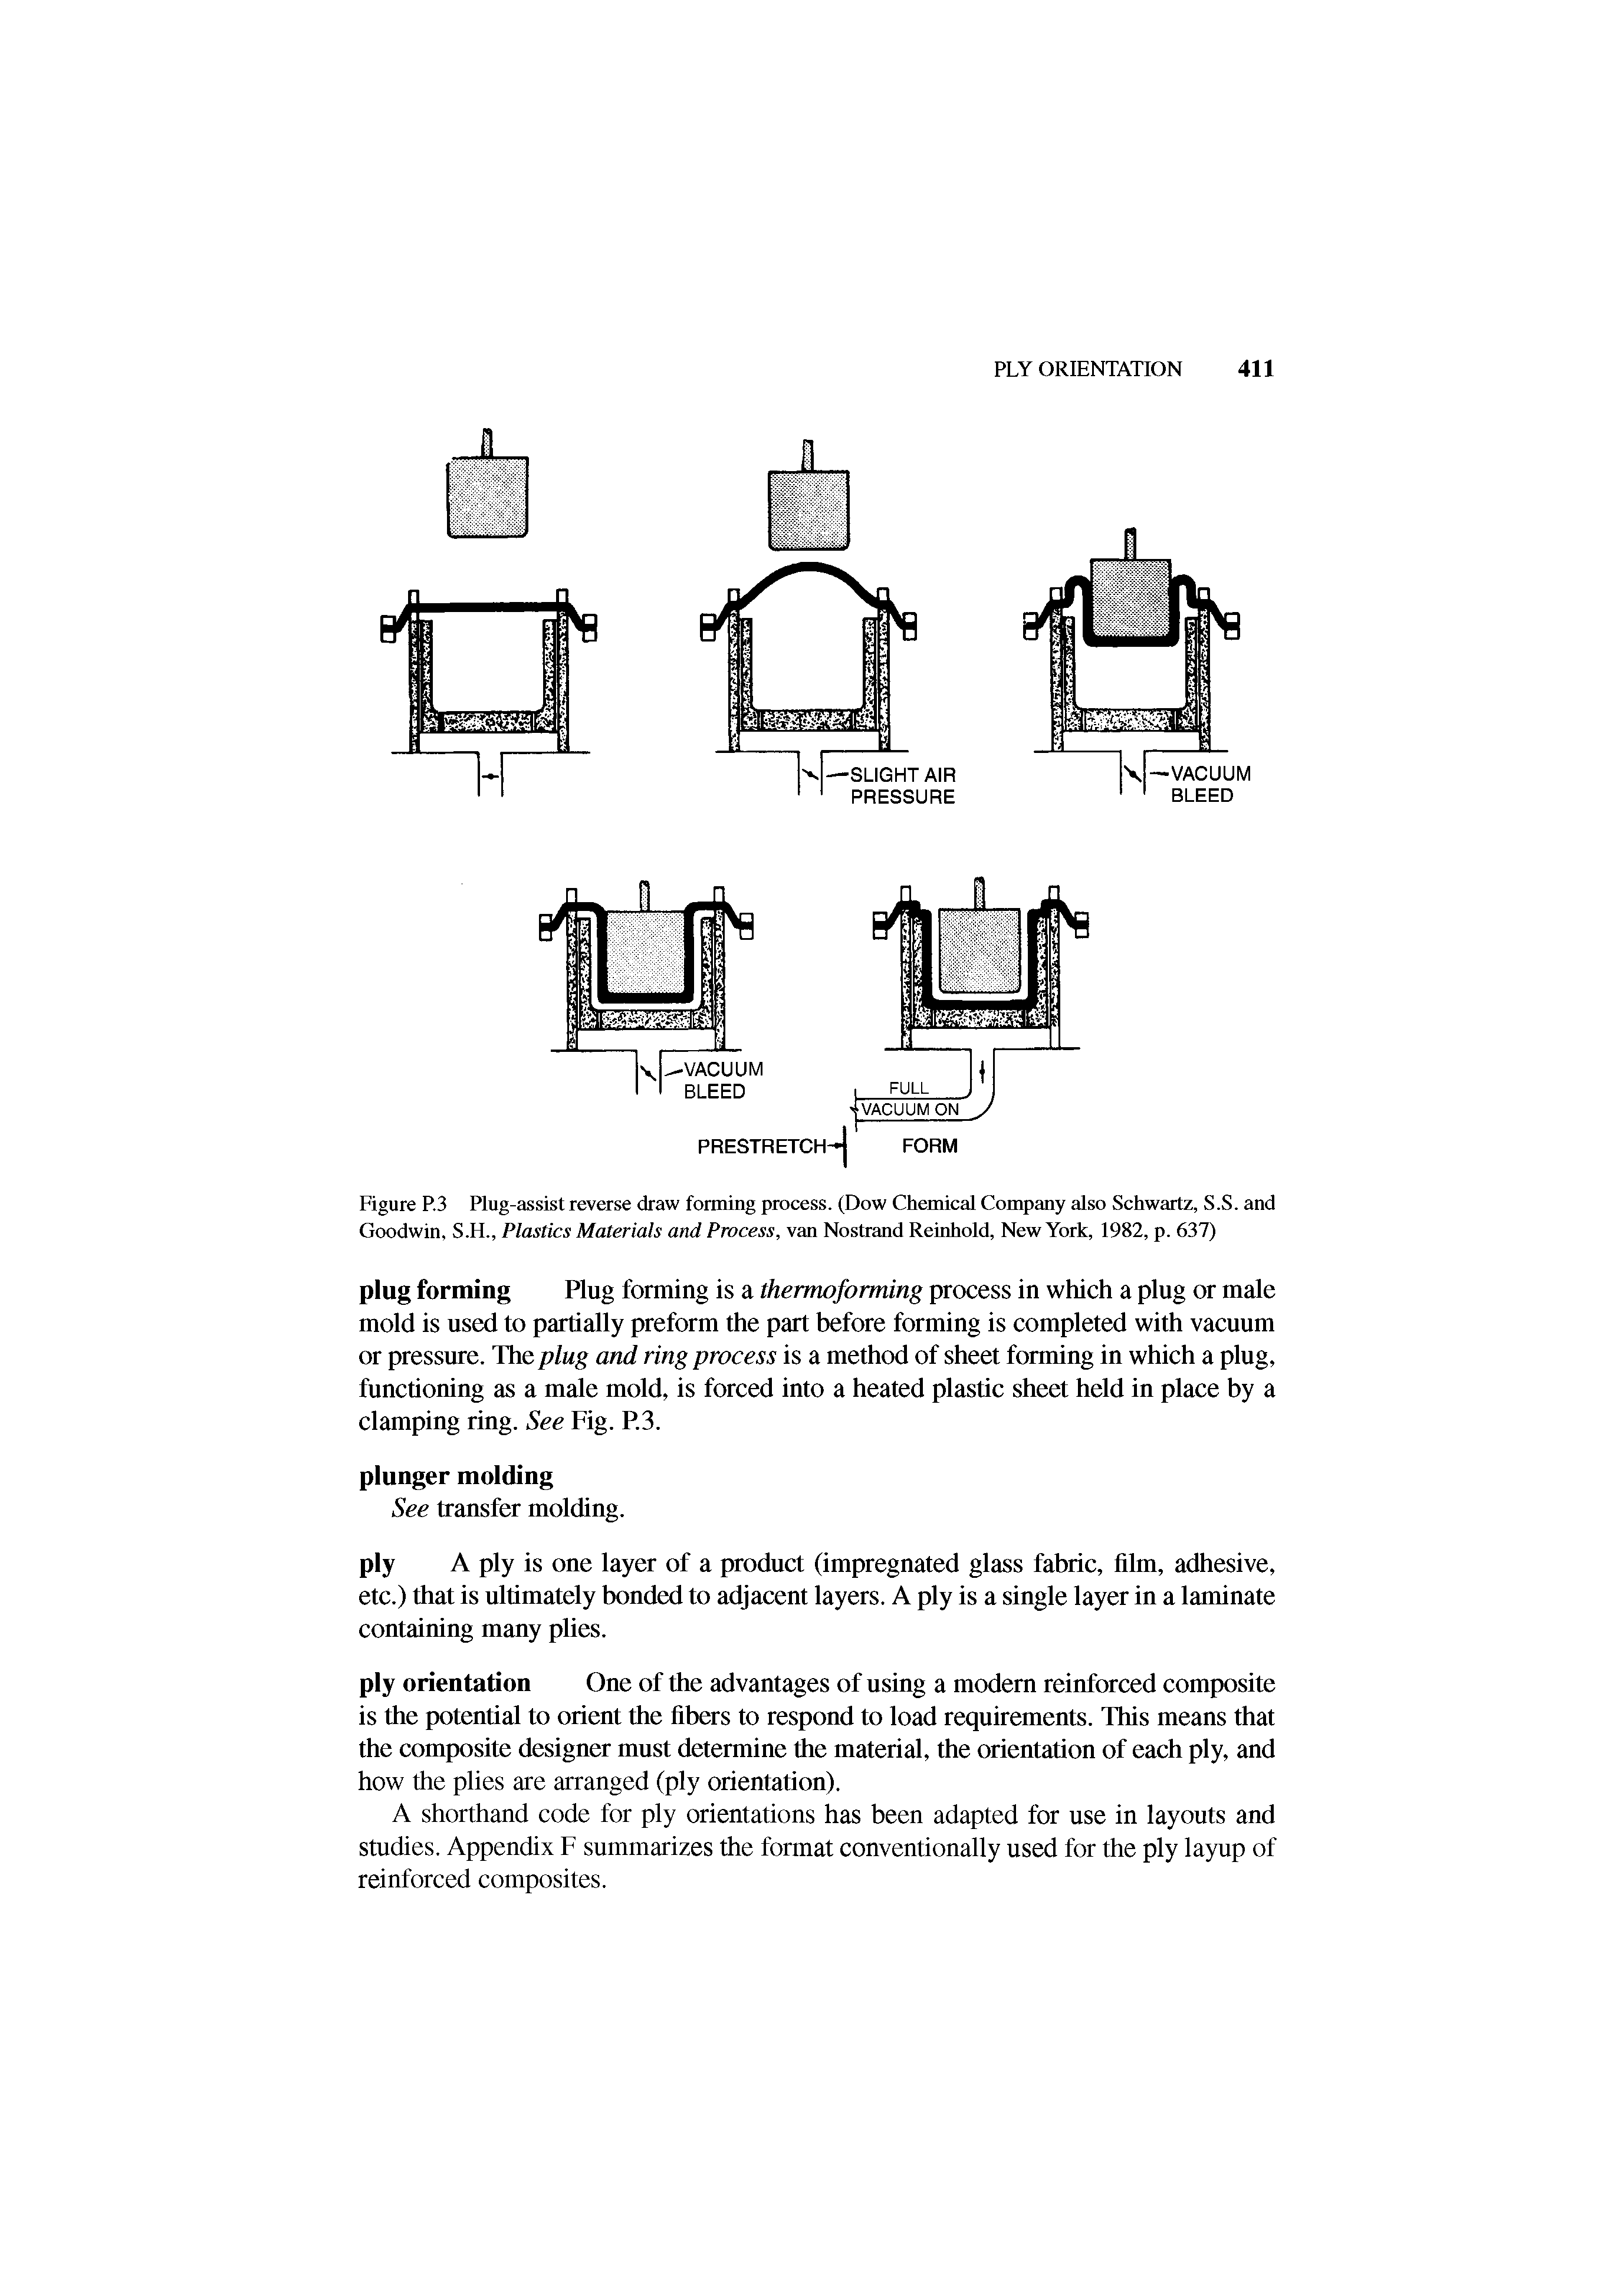 Figure P.3 Plug-assist reverse draw forming process. (Dow Chemical Company also Schwartz, S.S. and Goodwin, S.H., Plastics Materials and Process, van Nostrand Reinhold, New York, 1982, p. 637)...